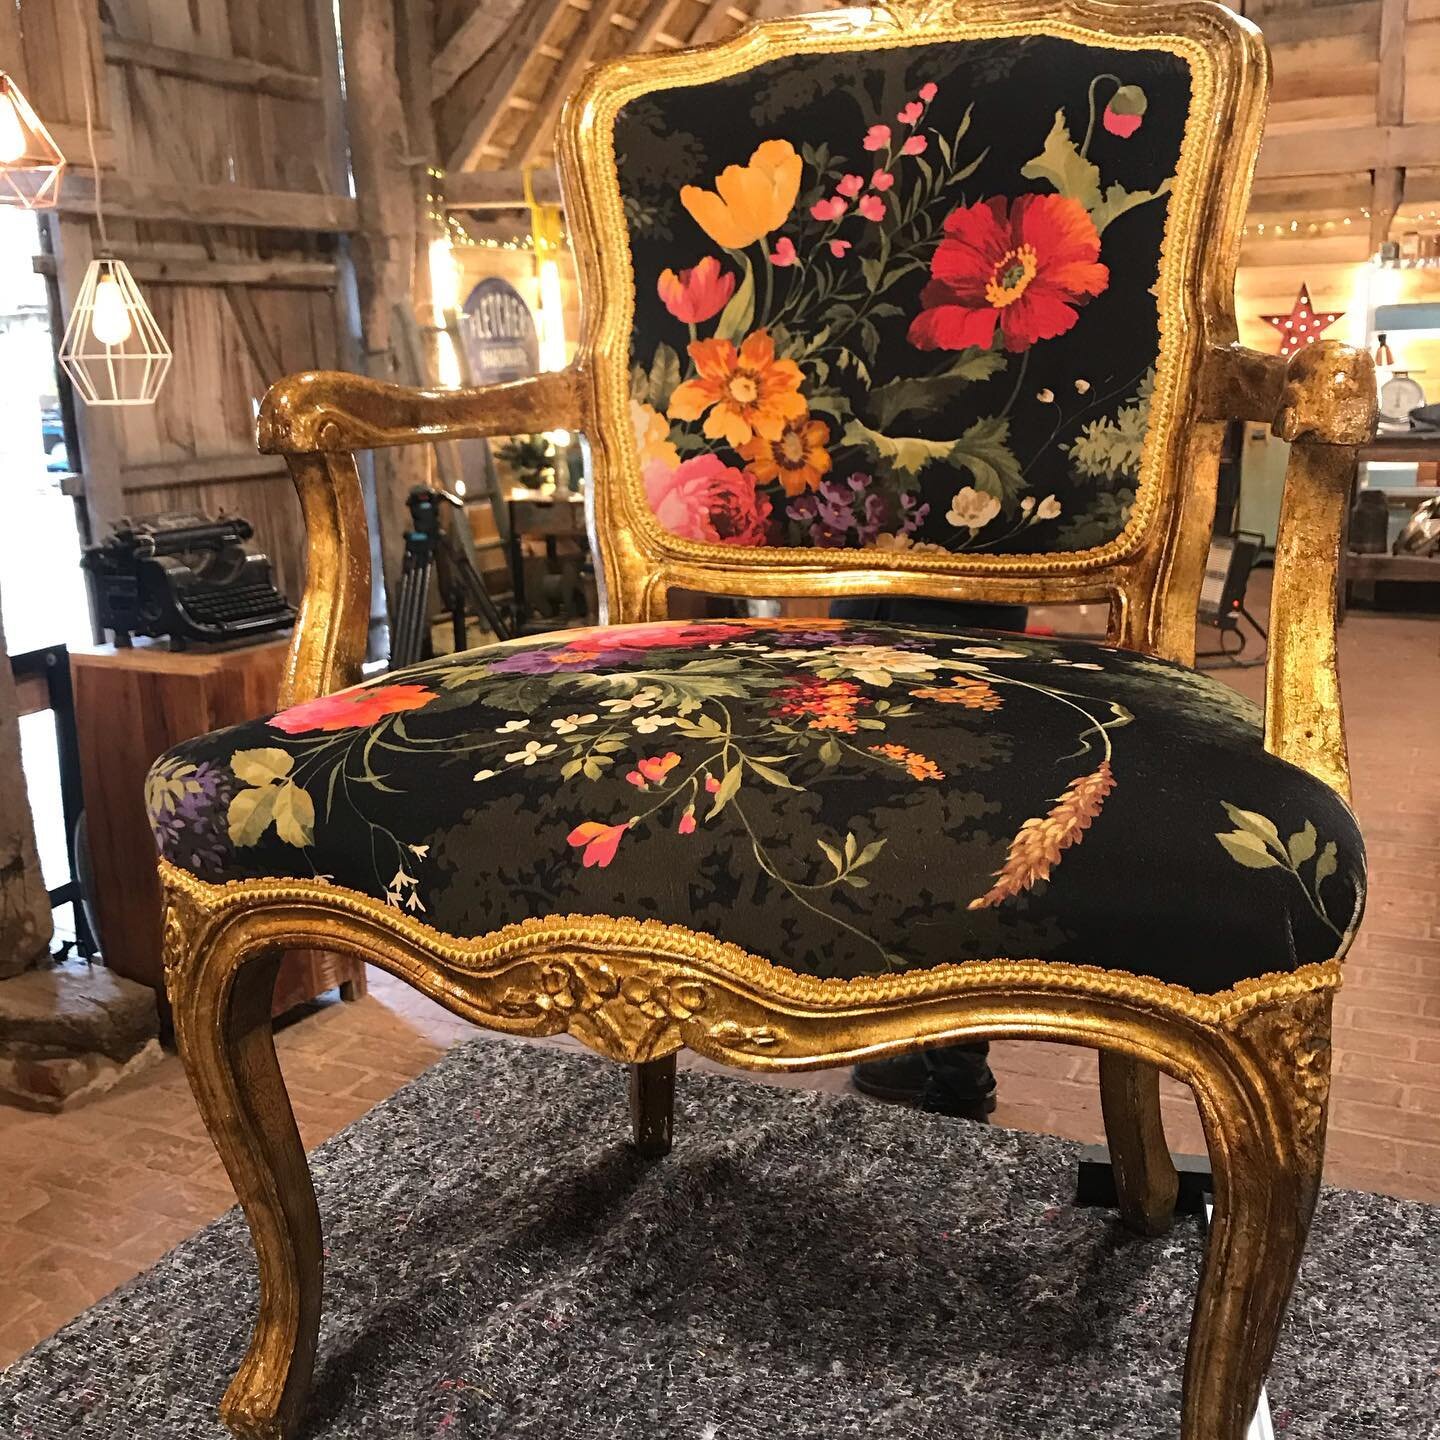 Really chuffed that Chantal liked the chair on @therepairshop.tv Here are some sneaky behind the scenes shots from the barn. I was really pleased that we were able to use fabric companies from my beloved East Midlands. They made the chair shine like 